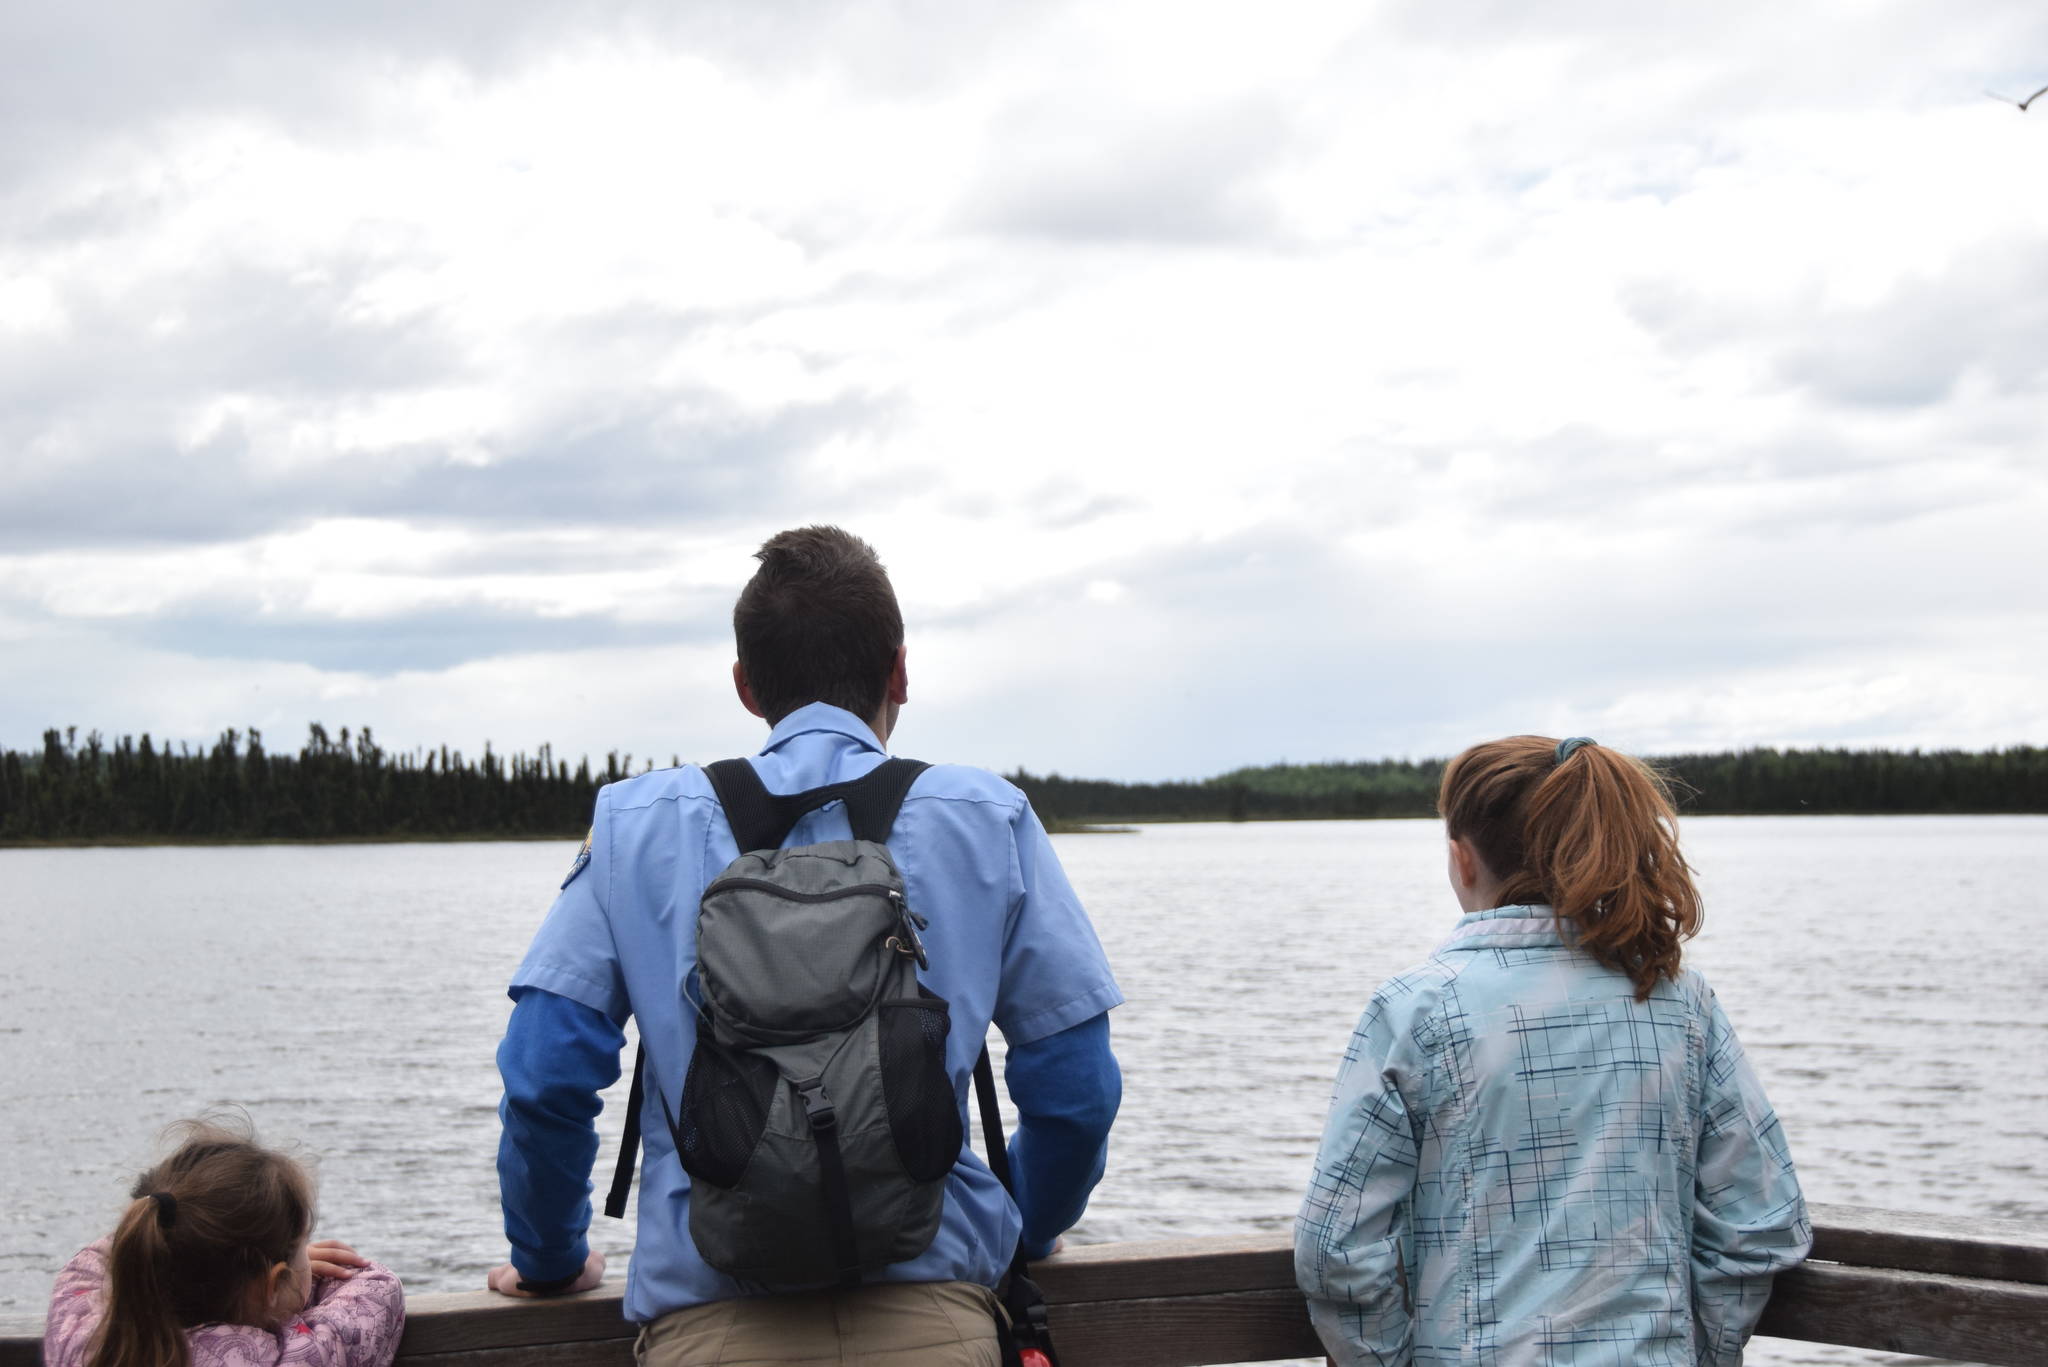 Annalynn Fay, left, David Fink, center, and Sasha Brott look out over Headquarters Lake during a guided hike on Centennial Trail in the Kenai National Wildlife Refuge on June 1, 2019. (Photo by Brian Mazurek/Peninsula Clarion)